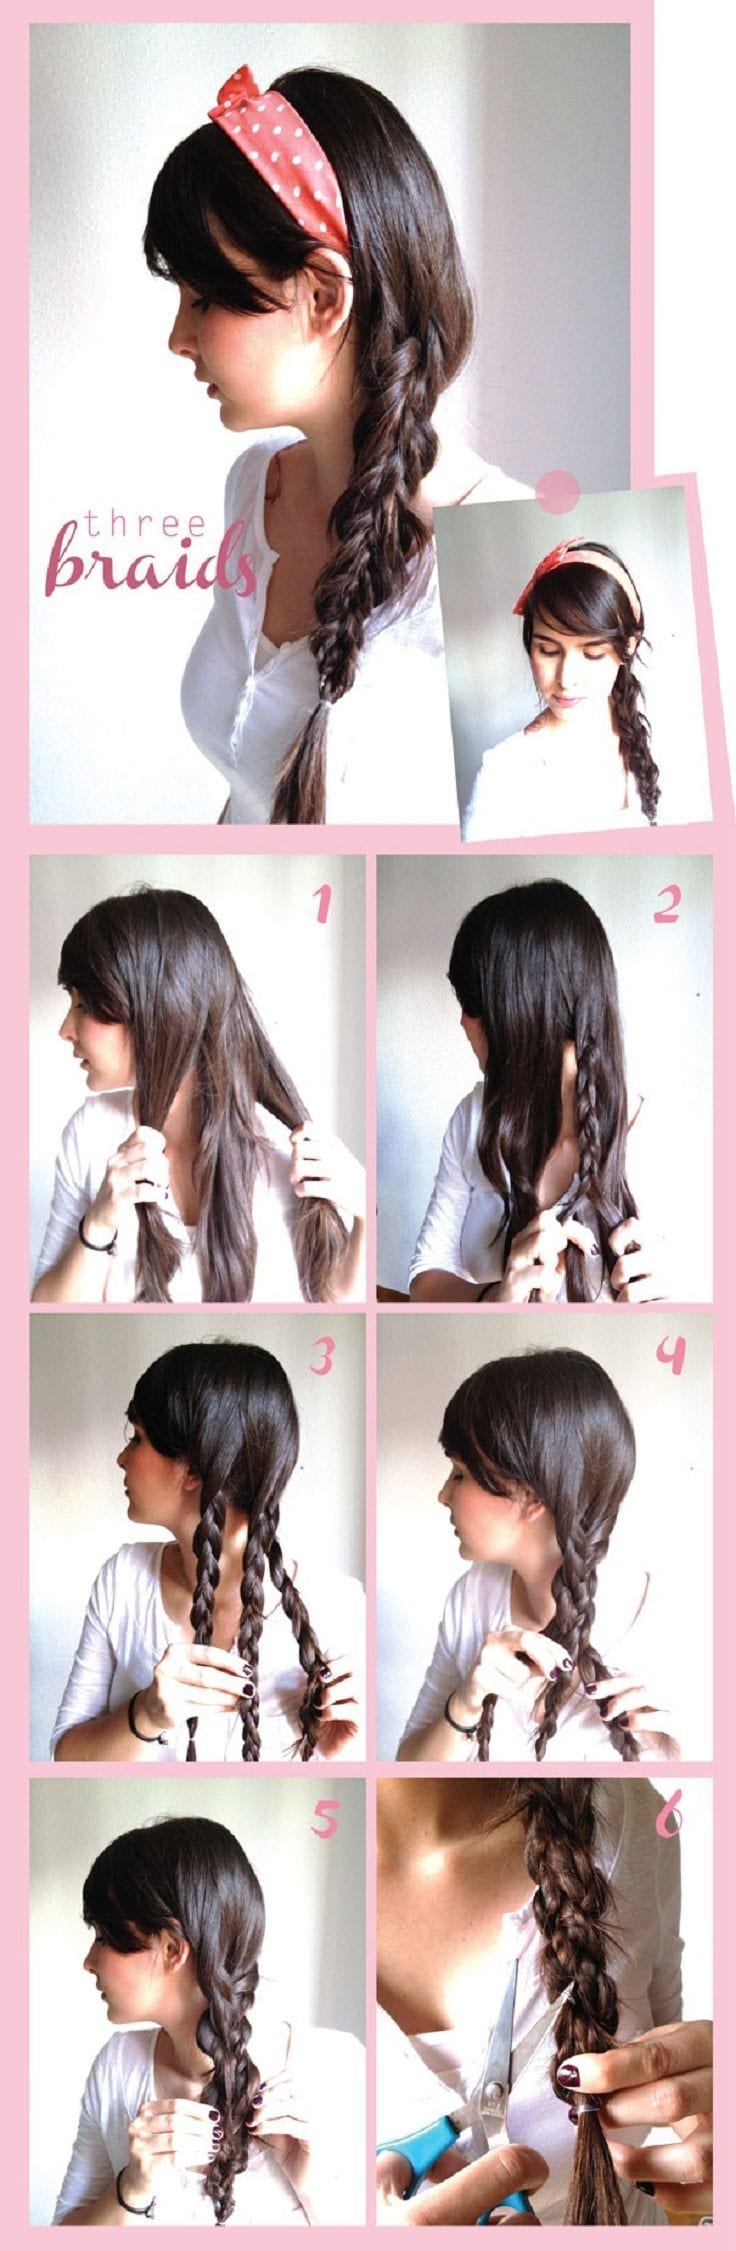 30 Easy 5 Minutes Hairstyles for women - Hairstyles Weekly